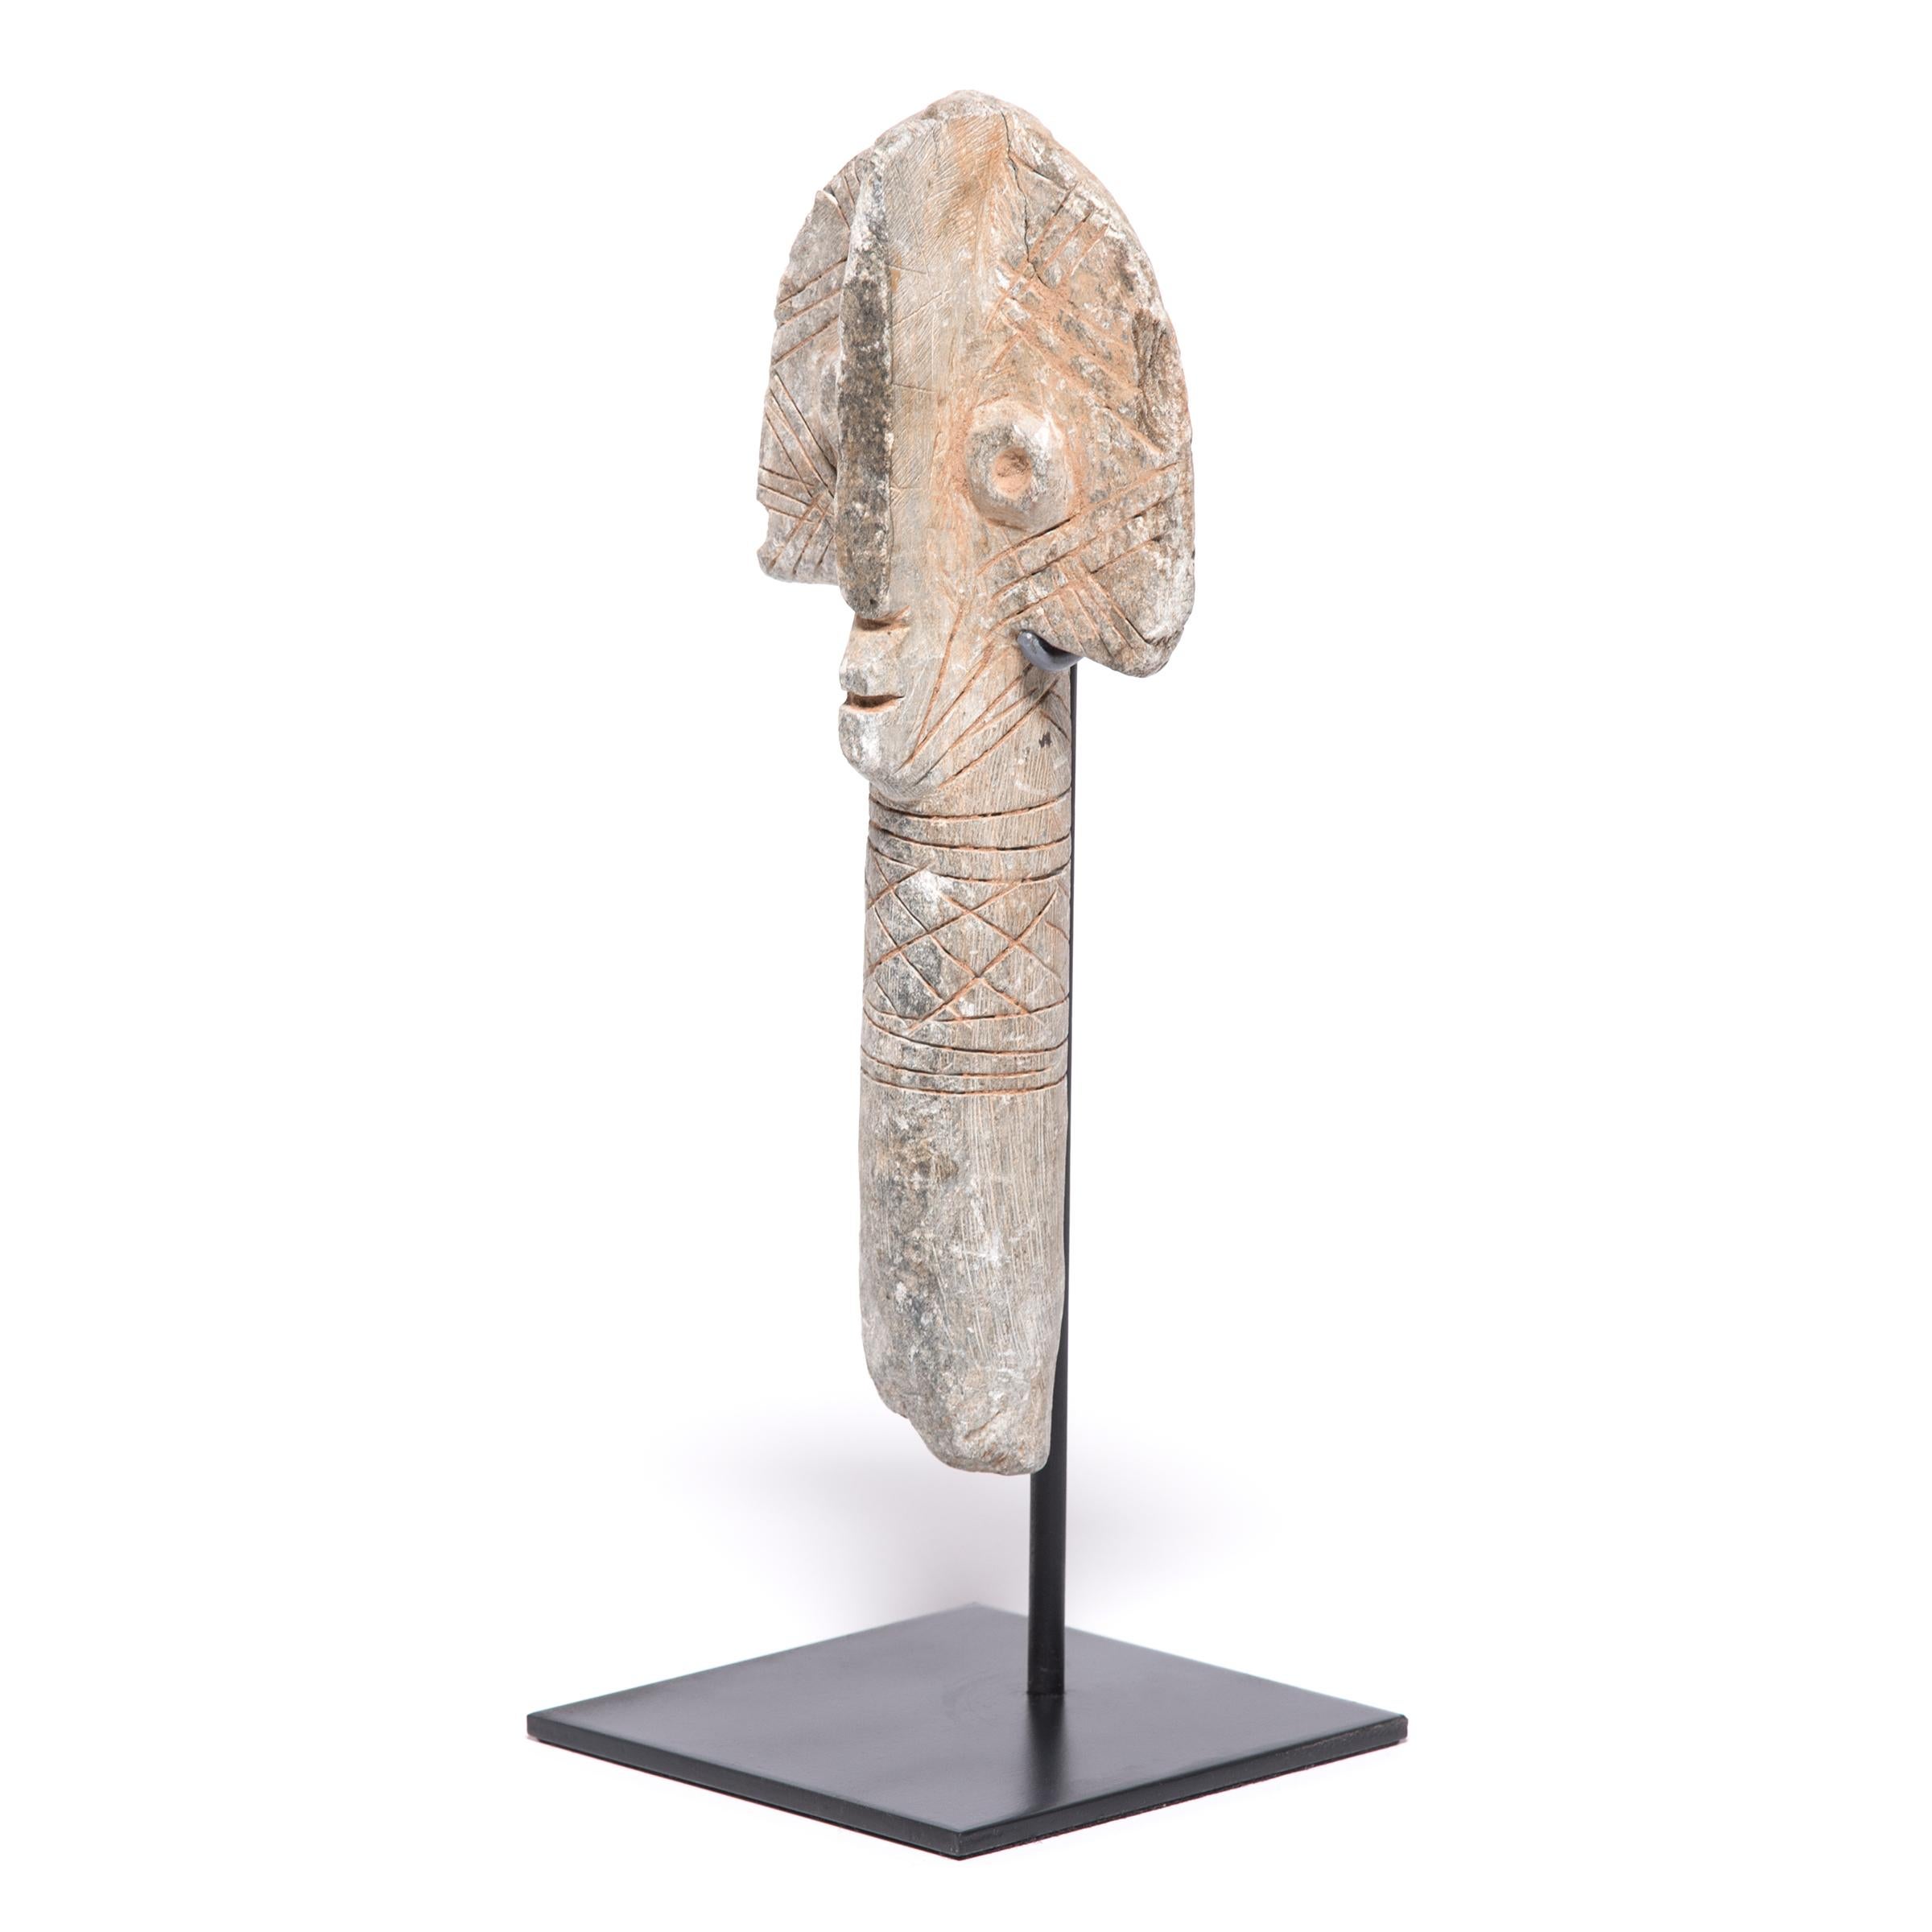 This abstract stone sculpture is a funerary marker of the Bura people of the Niger/Mali region. Little is known about the Bura civilization (c. 200 to 1000 AD), but it shares many of its artistic traditions with other pre-colonial African groups